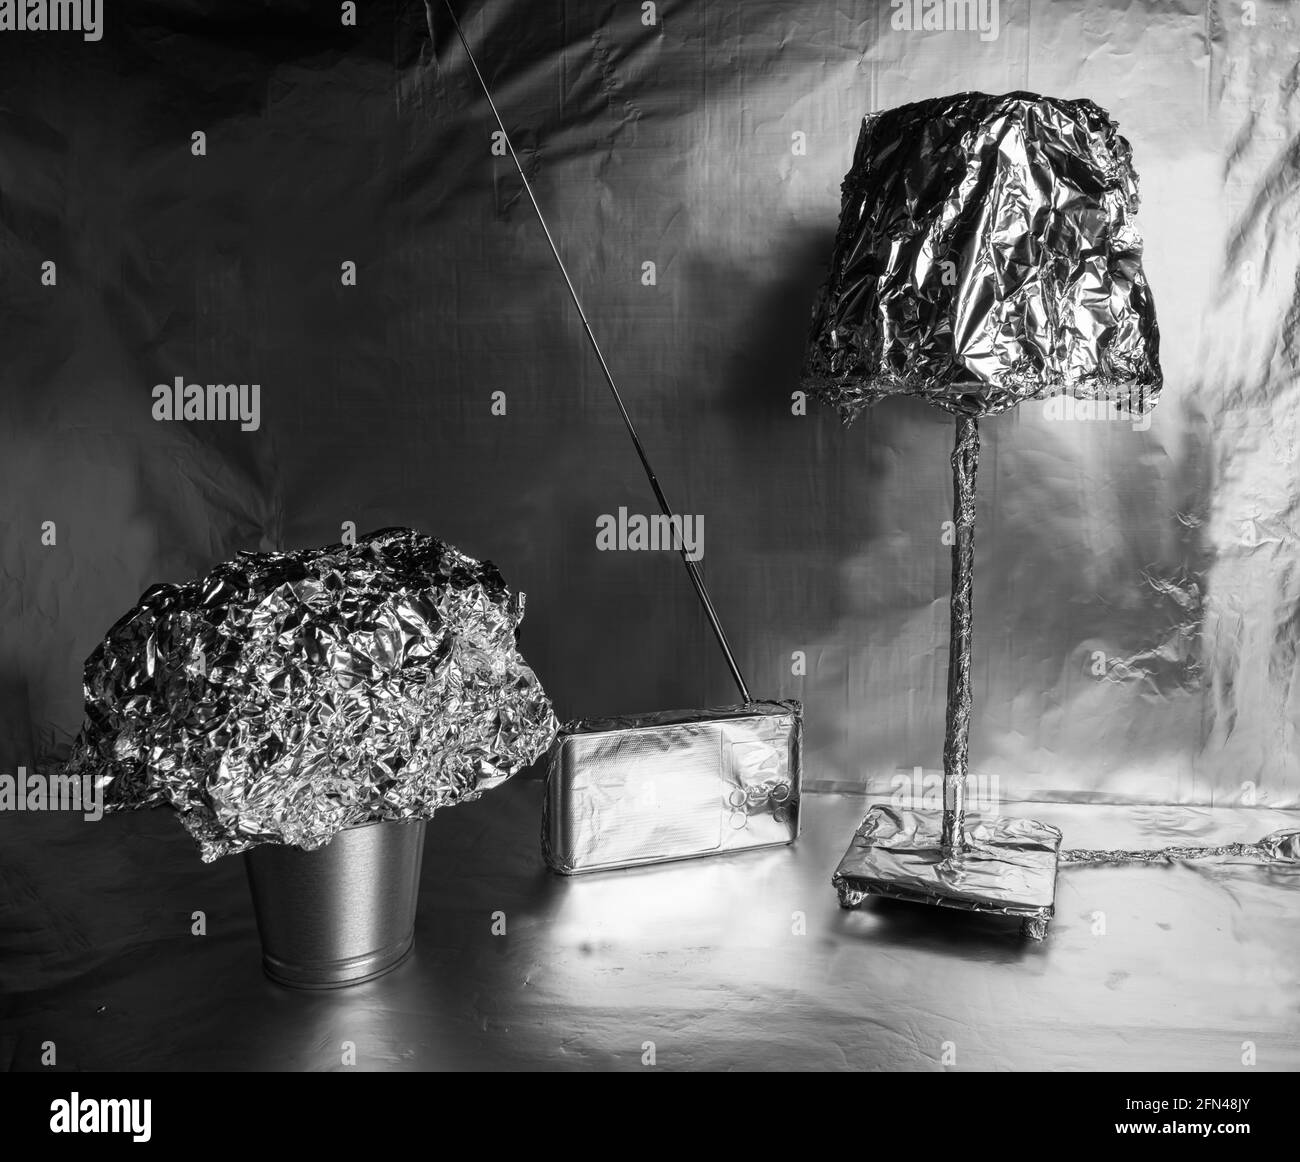 A lamp, a radio and a plant pot wrapped in aluminum foil Stock Photo